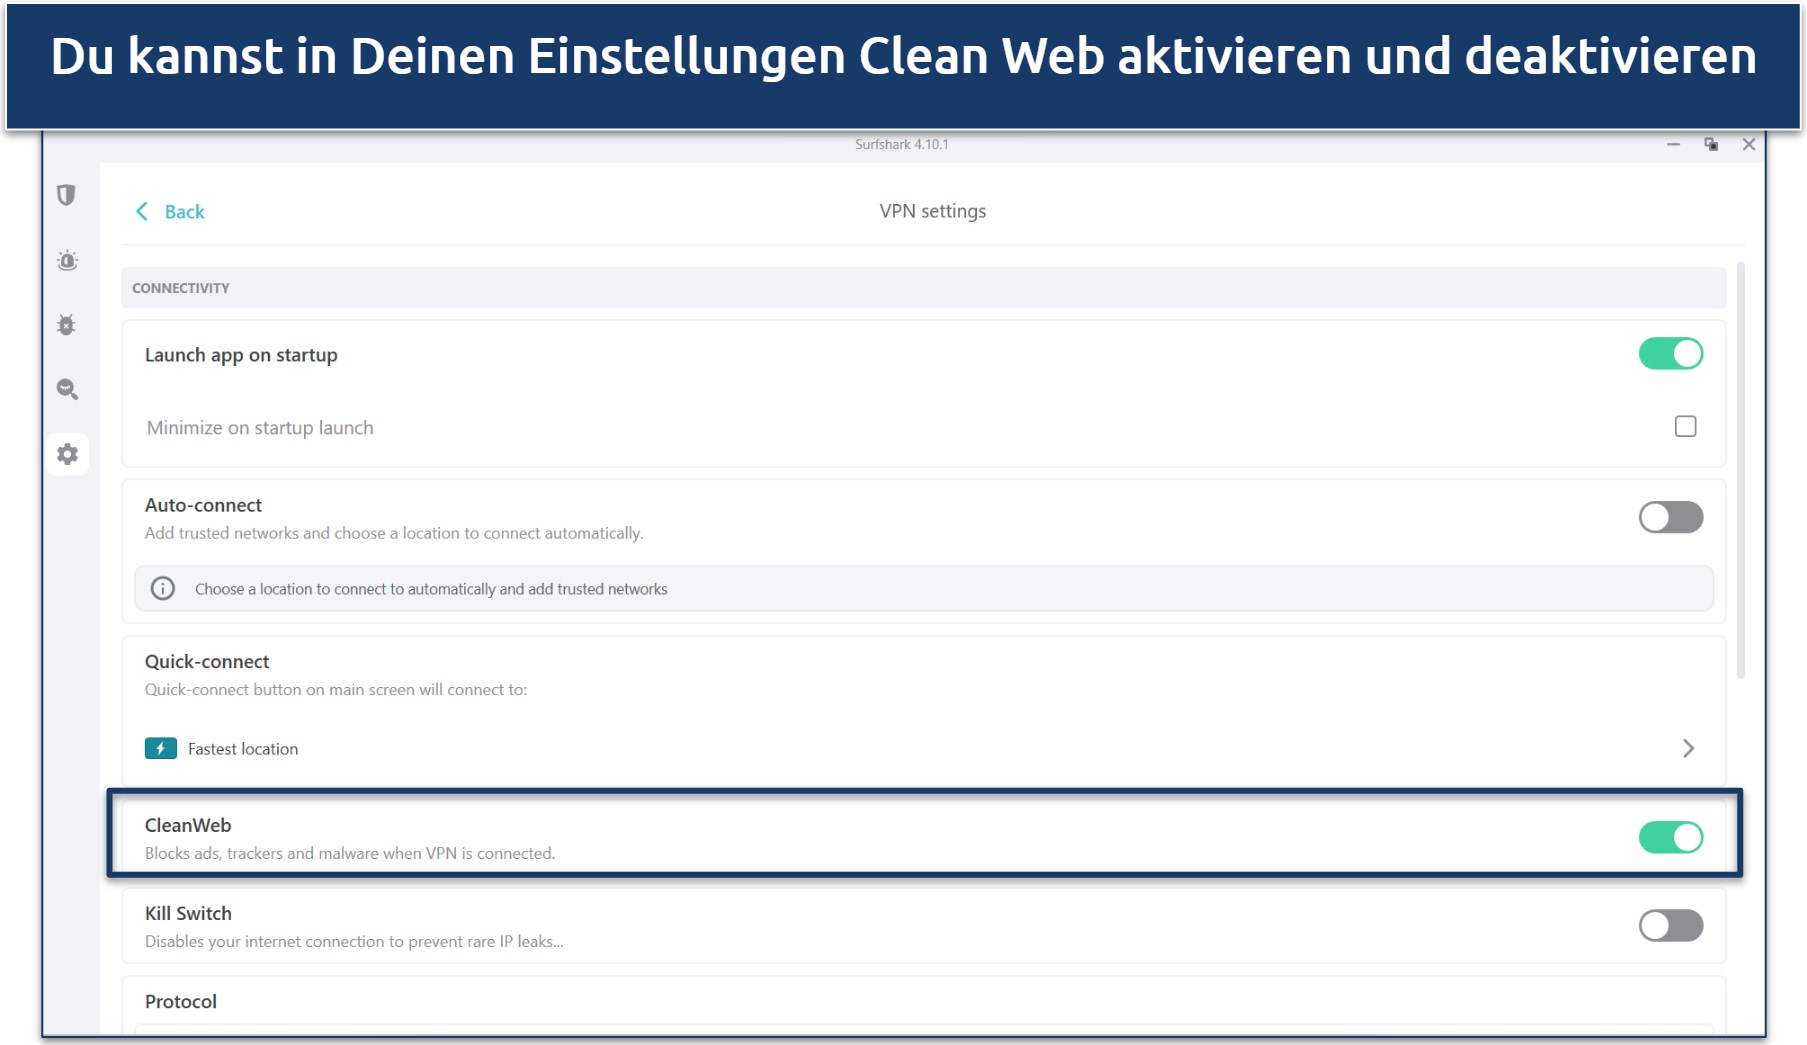 A screenshot of Surfshark's settings showing the CleanWeb ad blocker enabled